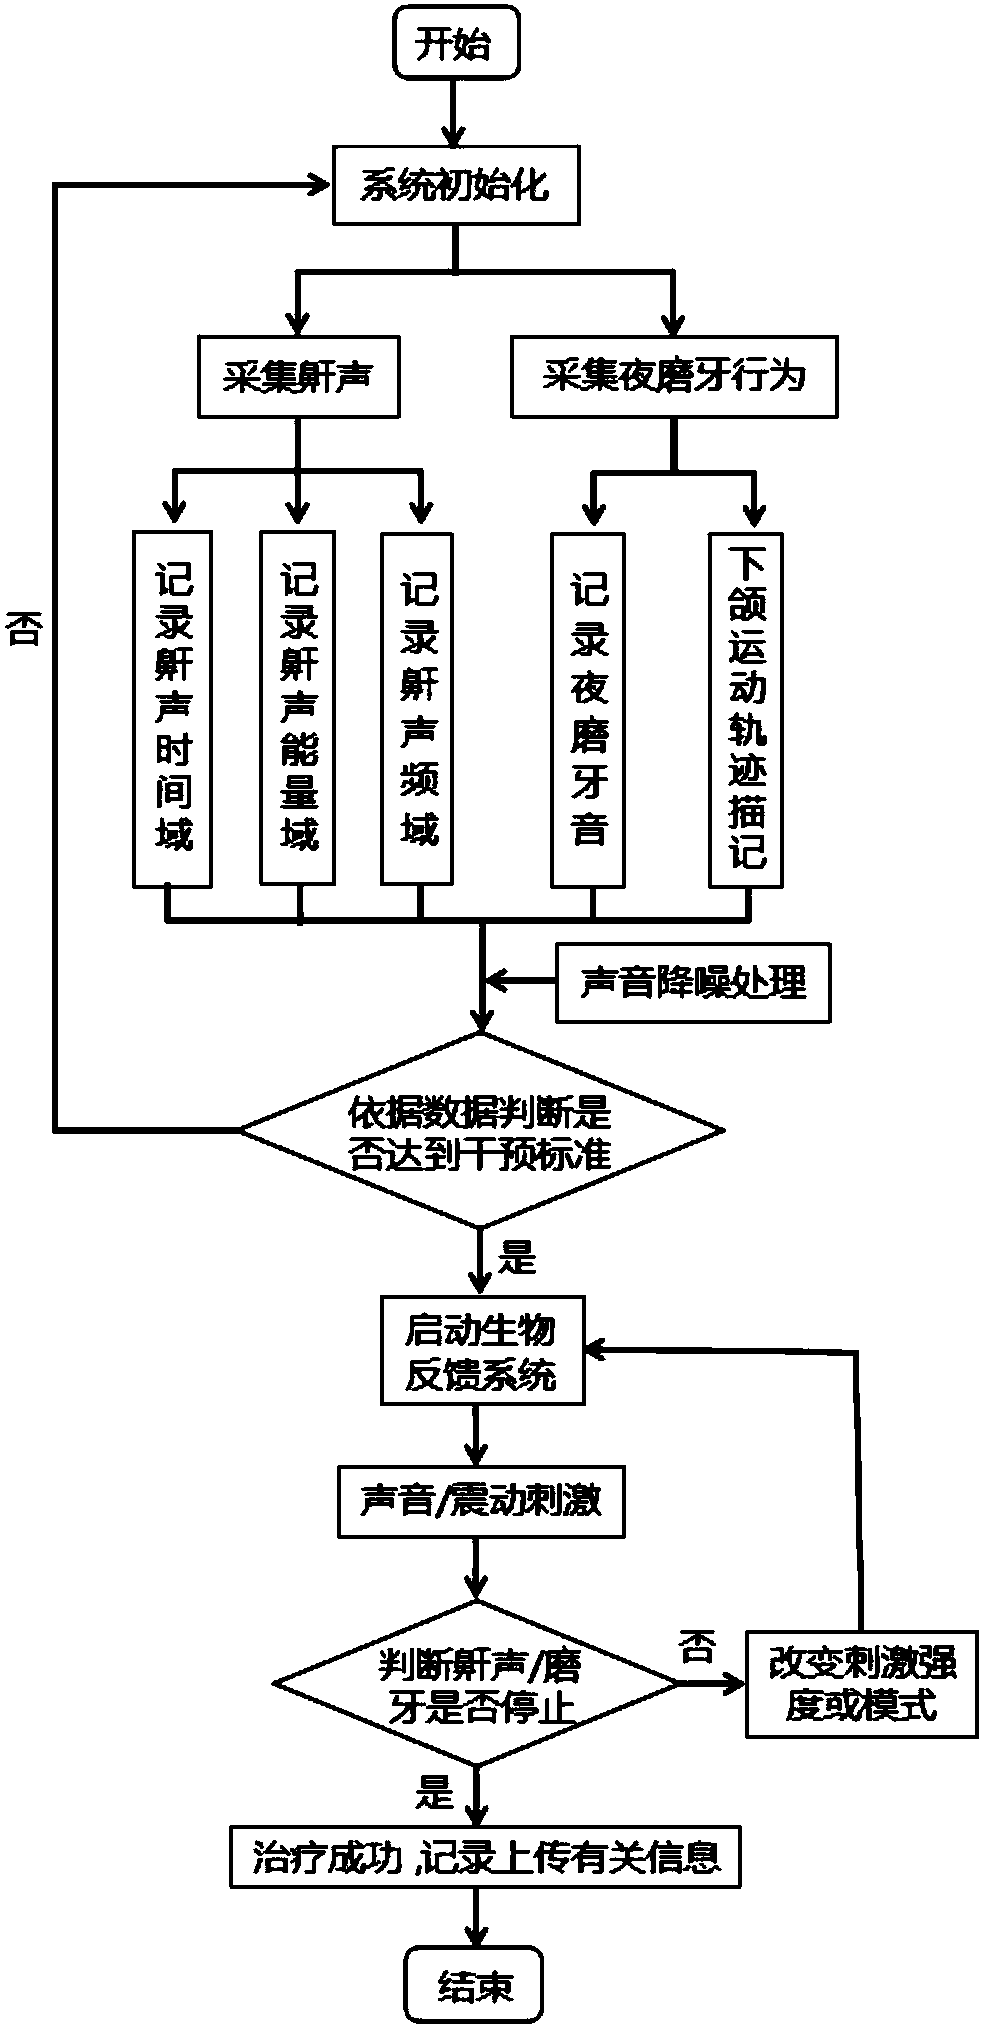 Biofeedback therapy mechanism and intelligent sleep diagnosis and treatment system based on biofeedback therapy mechanism